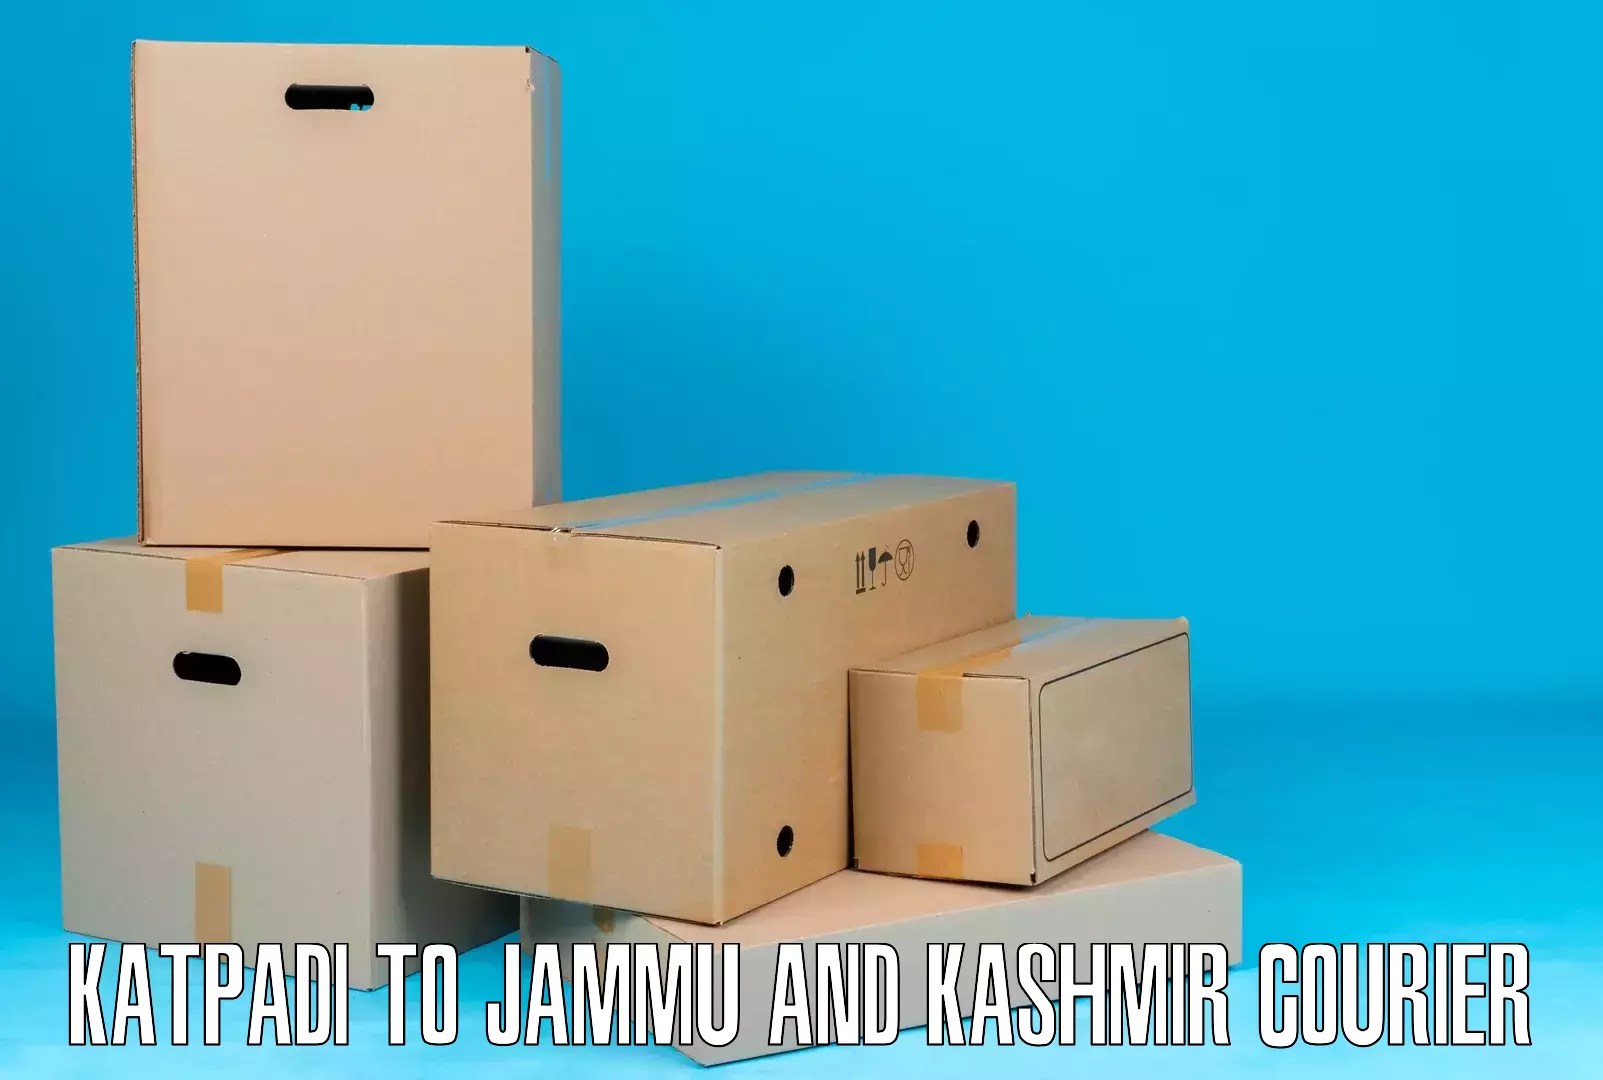 Package delivery network Katpadi to Kathua